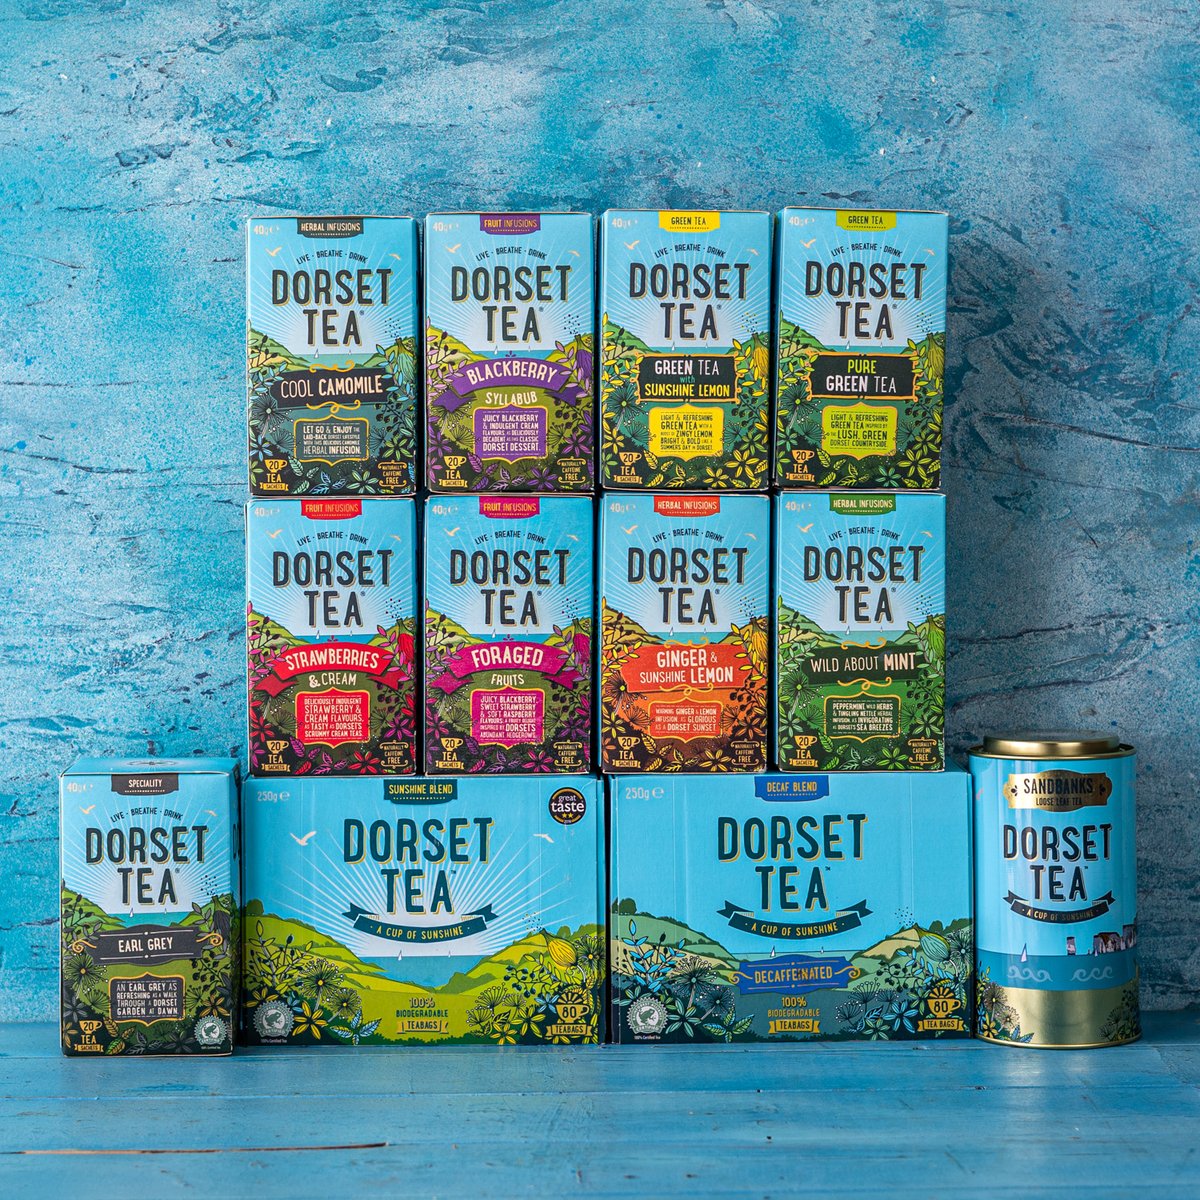 Have you seen our Amazon store? All you favourite Dorset Tea products available at the click of a button! Plus you can use prime delivery (if you've had that awful moment of finding an empty tea box) and buy in bulk! ow.ly/AHE650OI6yV